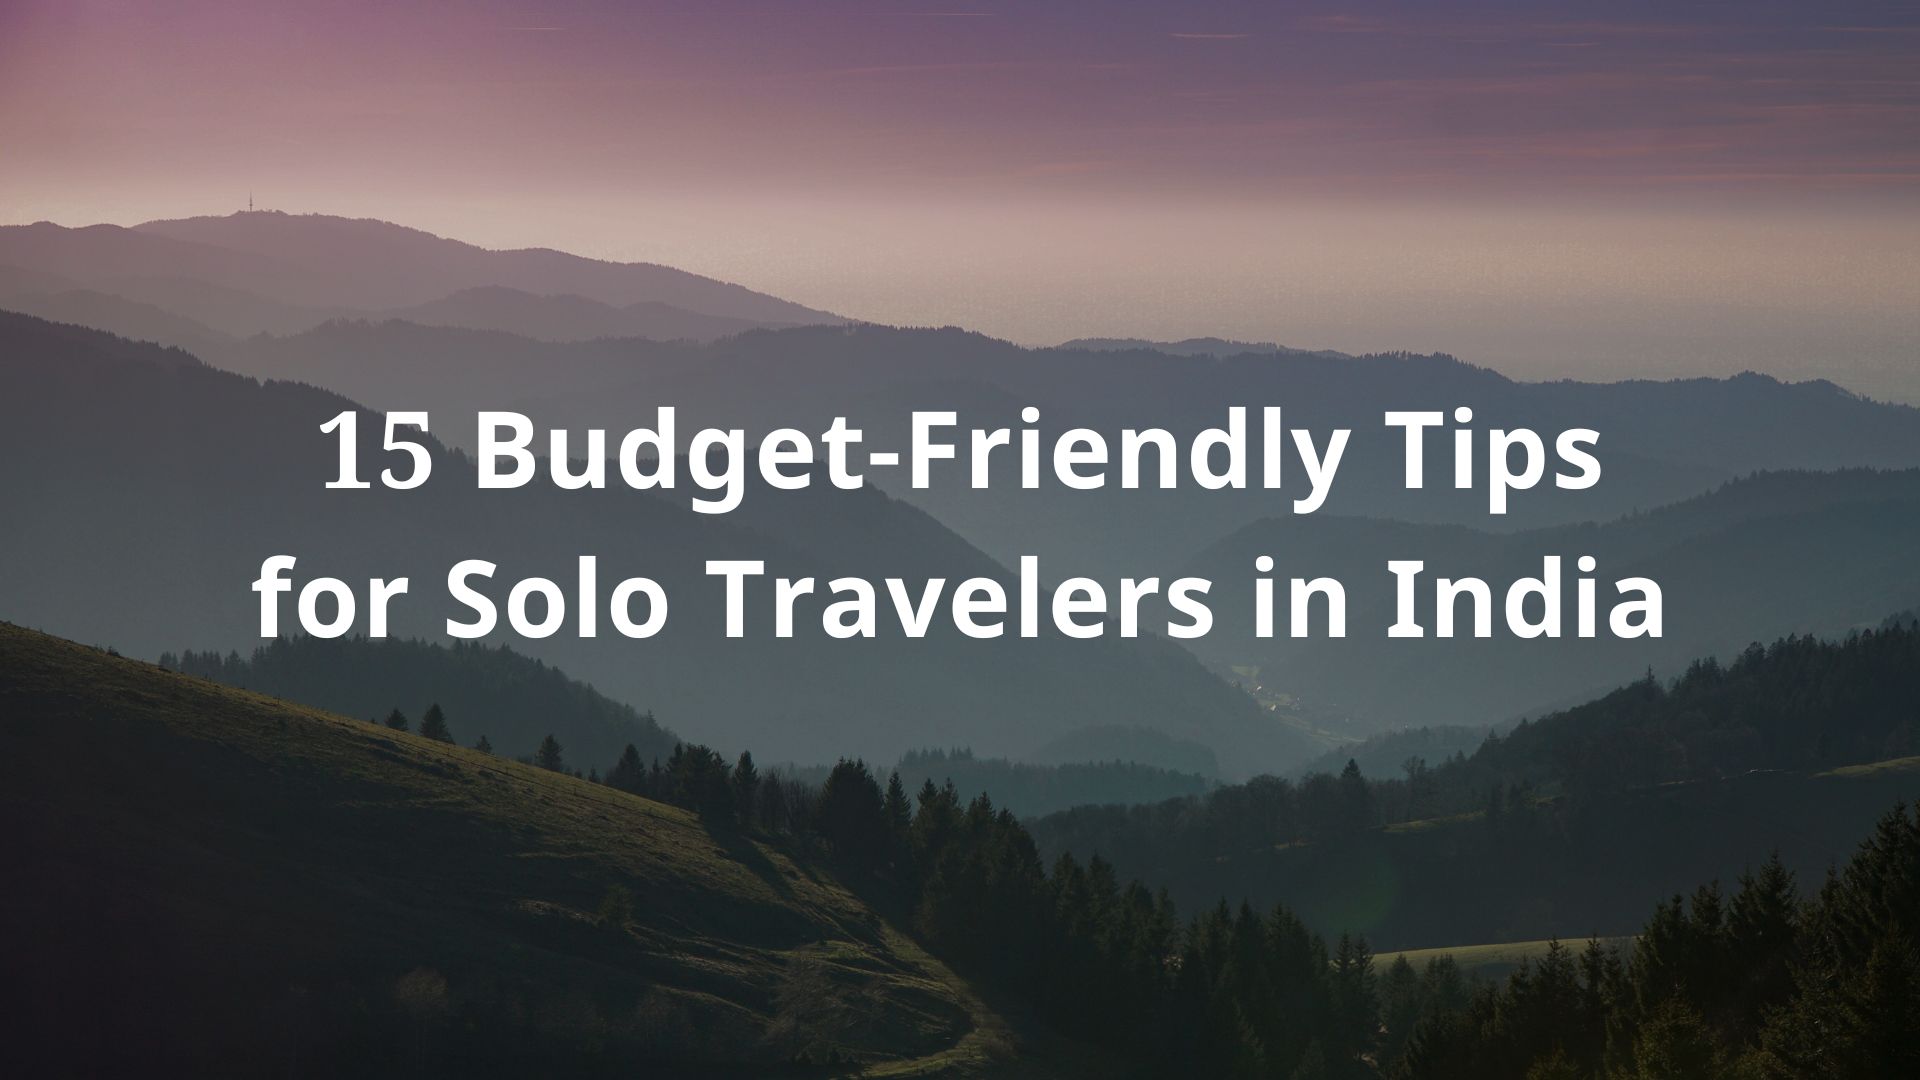 15 Budget-Friendly Tips for Solo Travelers in India